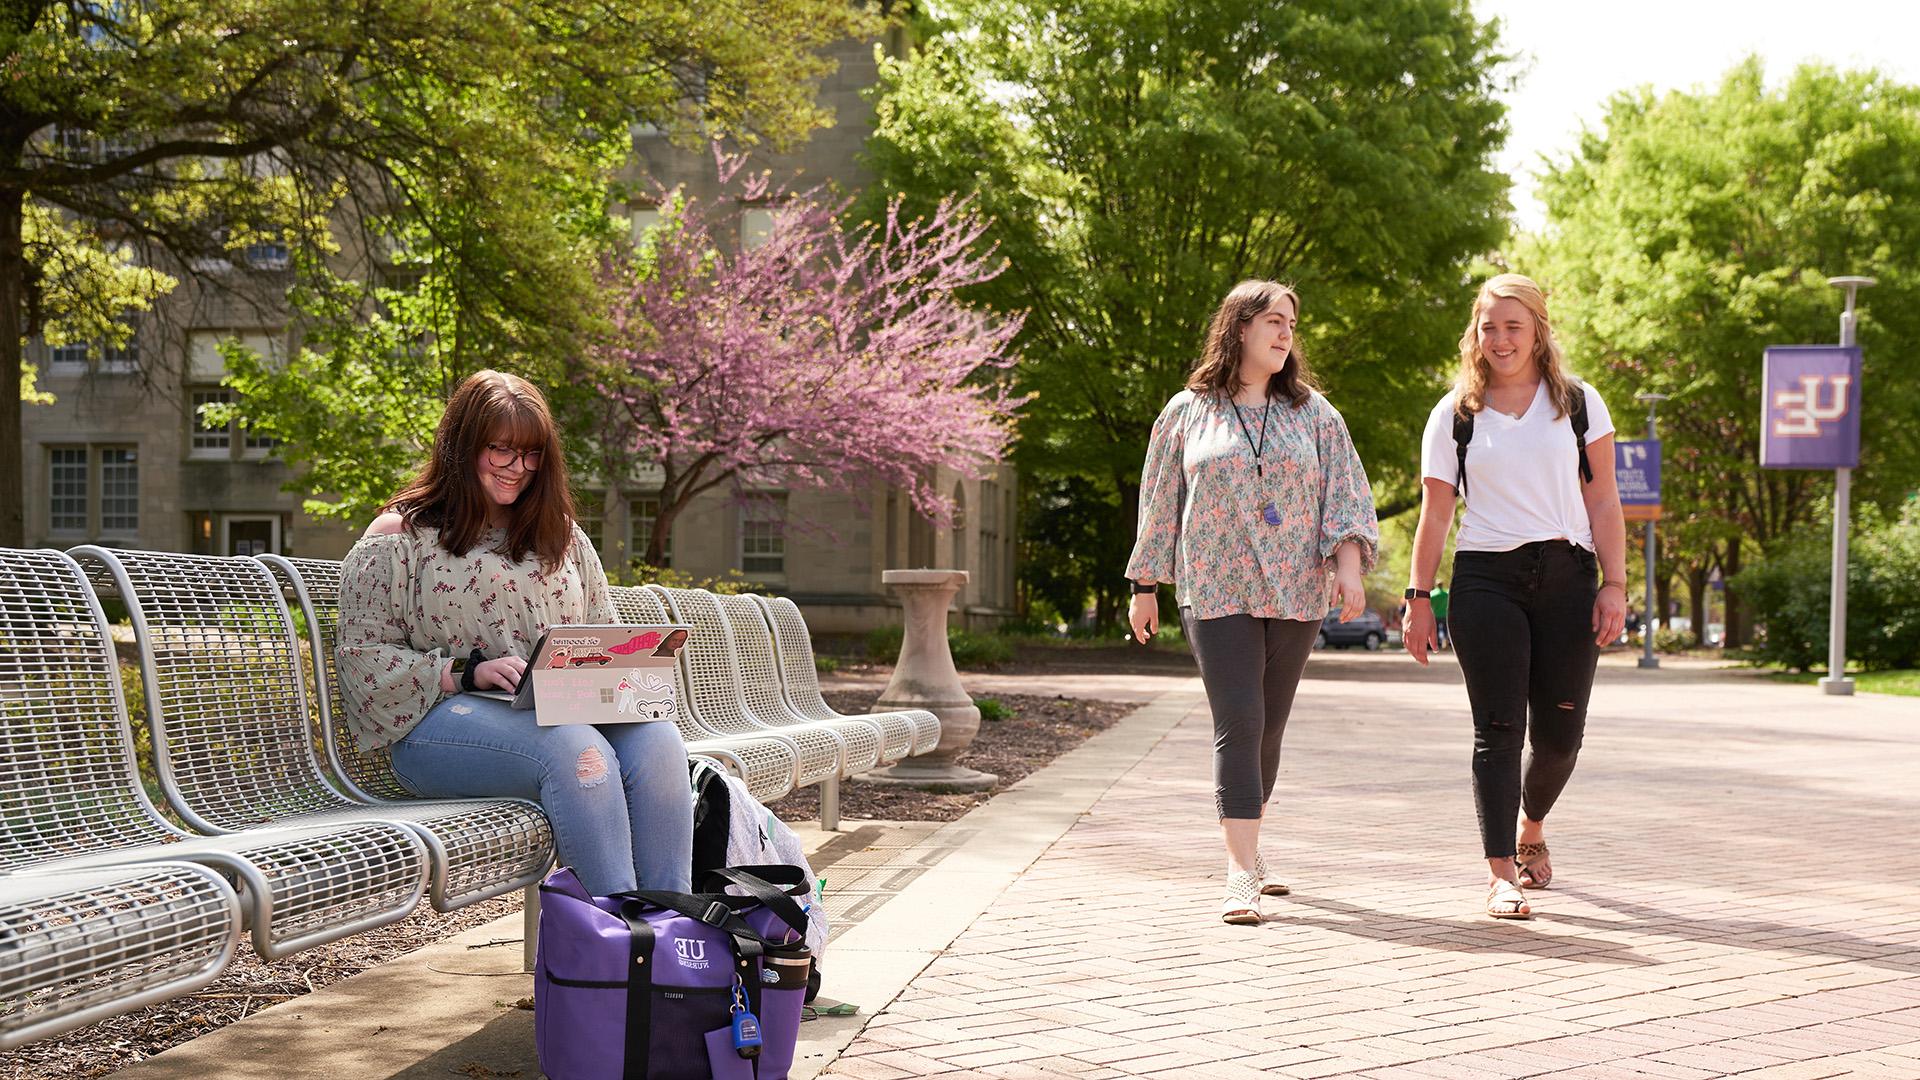 Women on campus walking and sitting